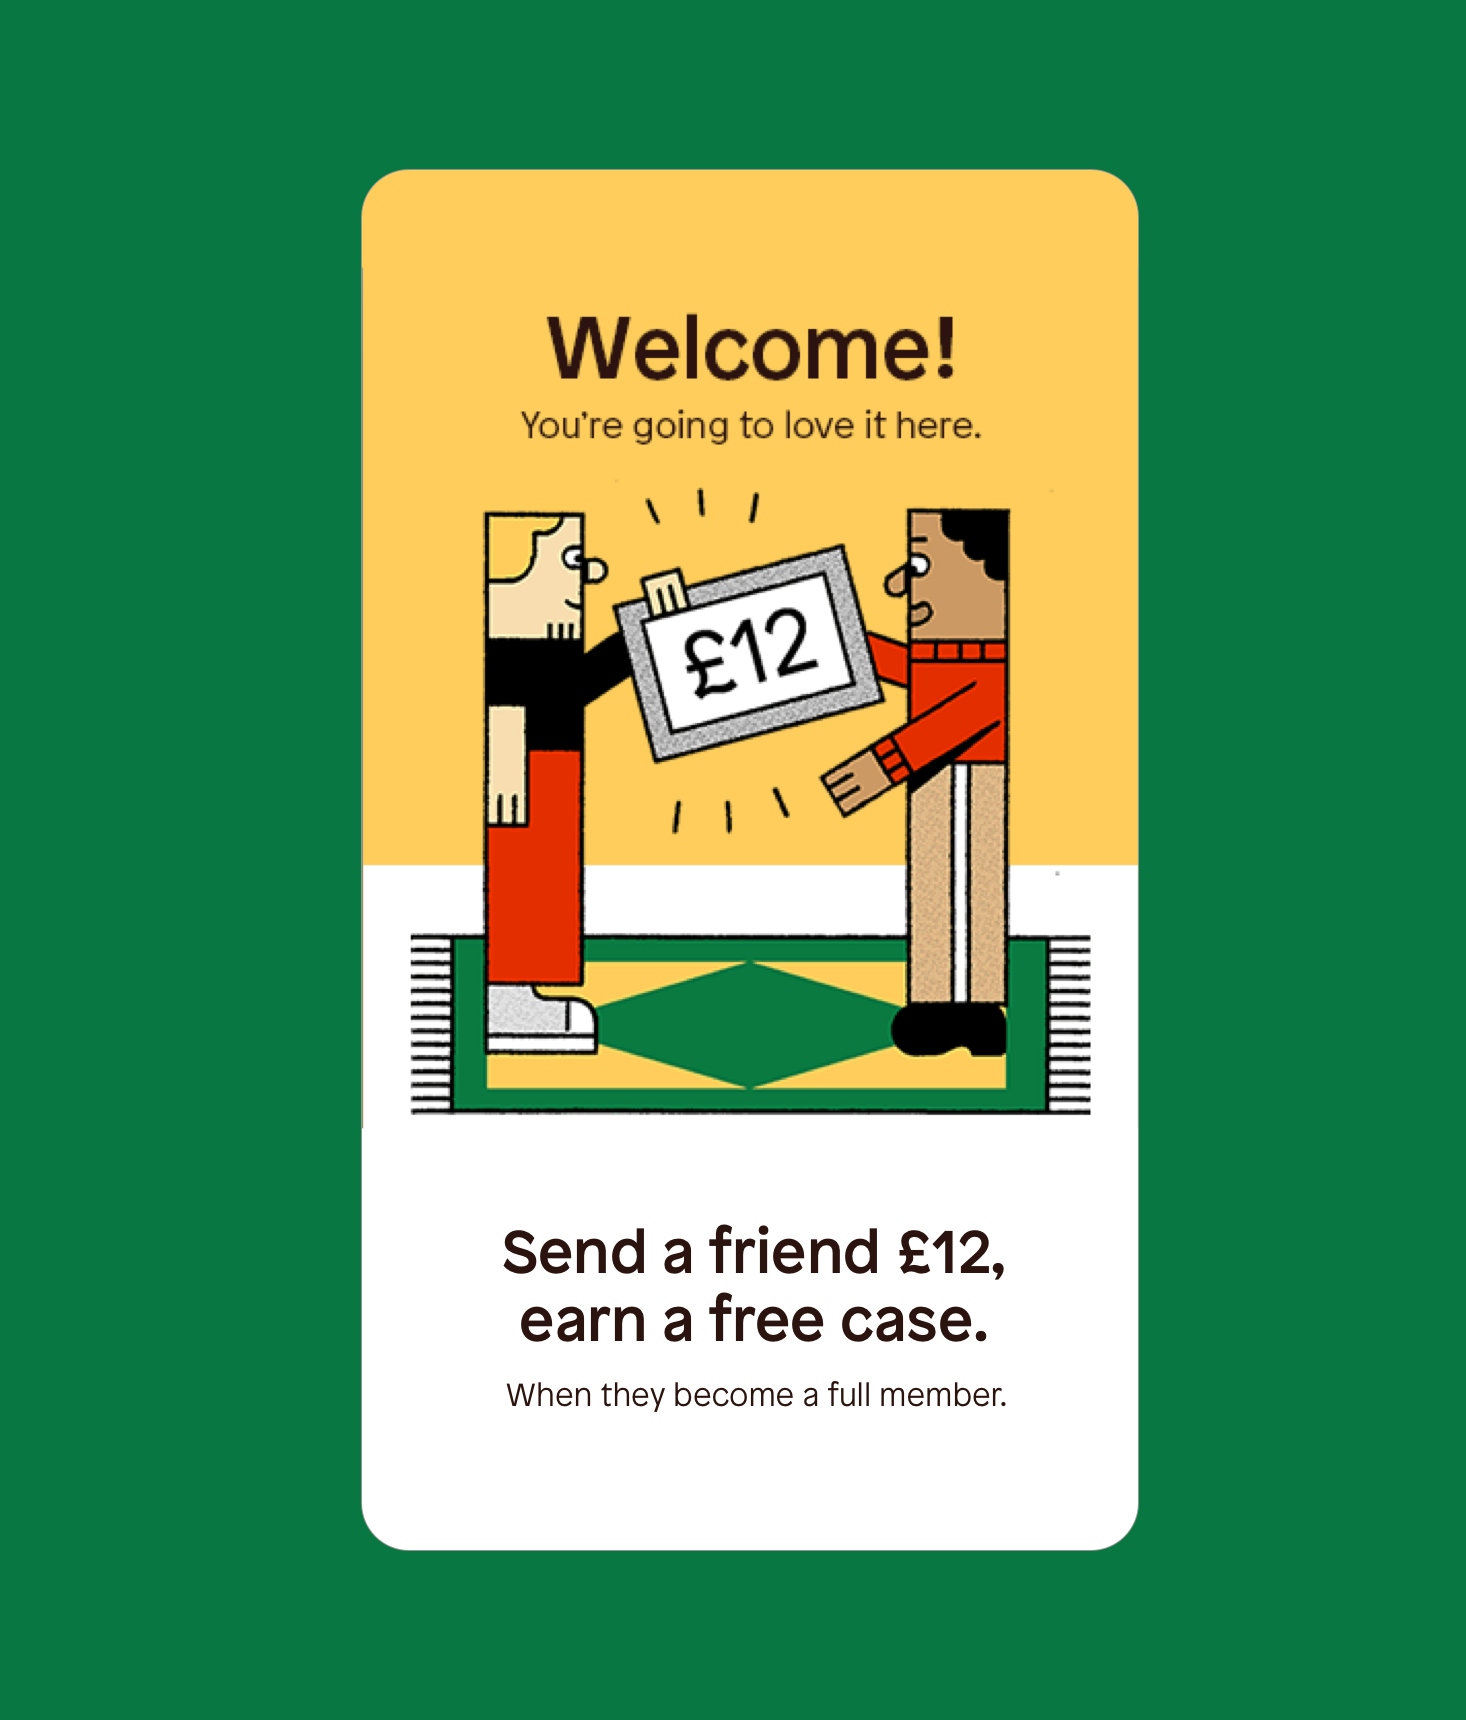 A mobile phone style screen depicts the Beer52 “Welcome” page on a racing green background